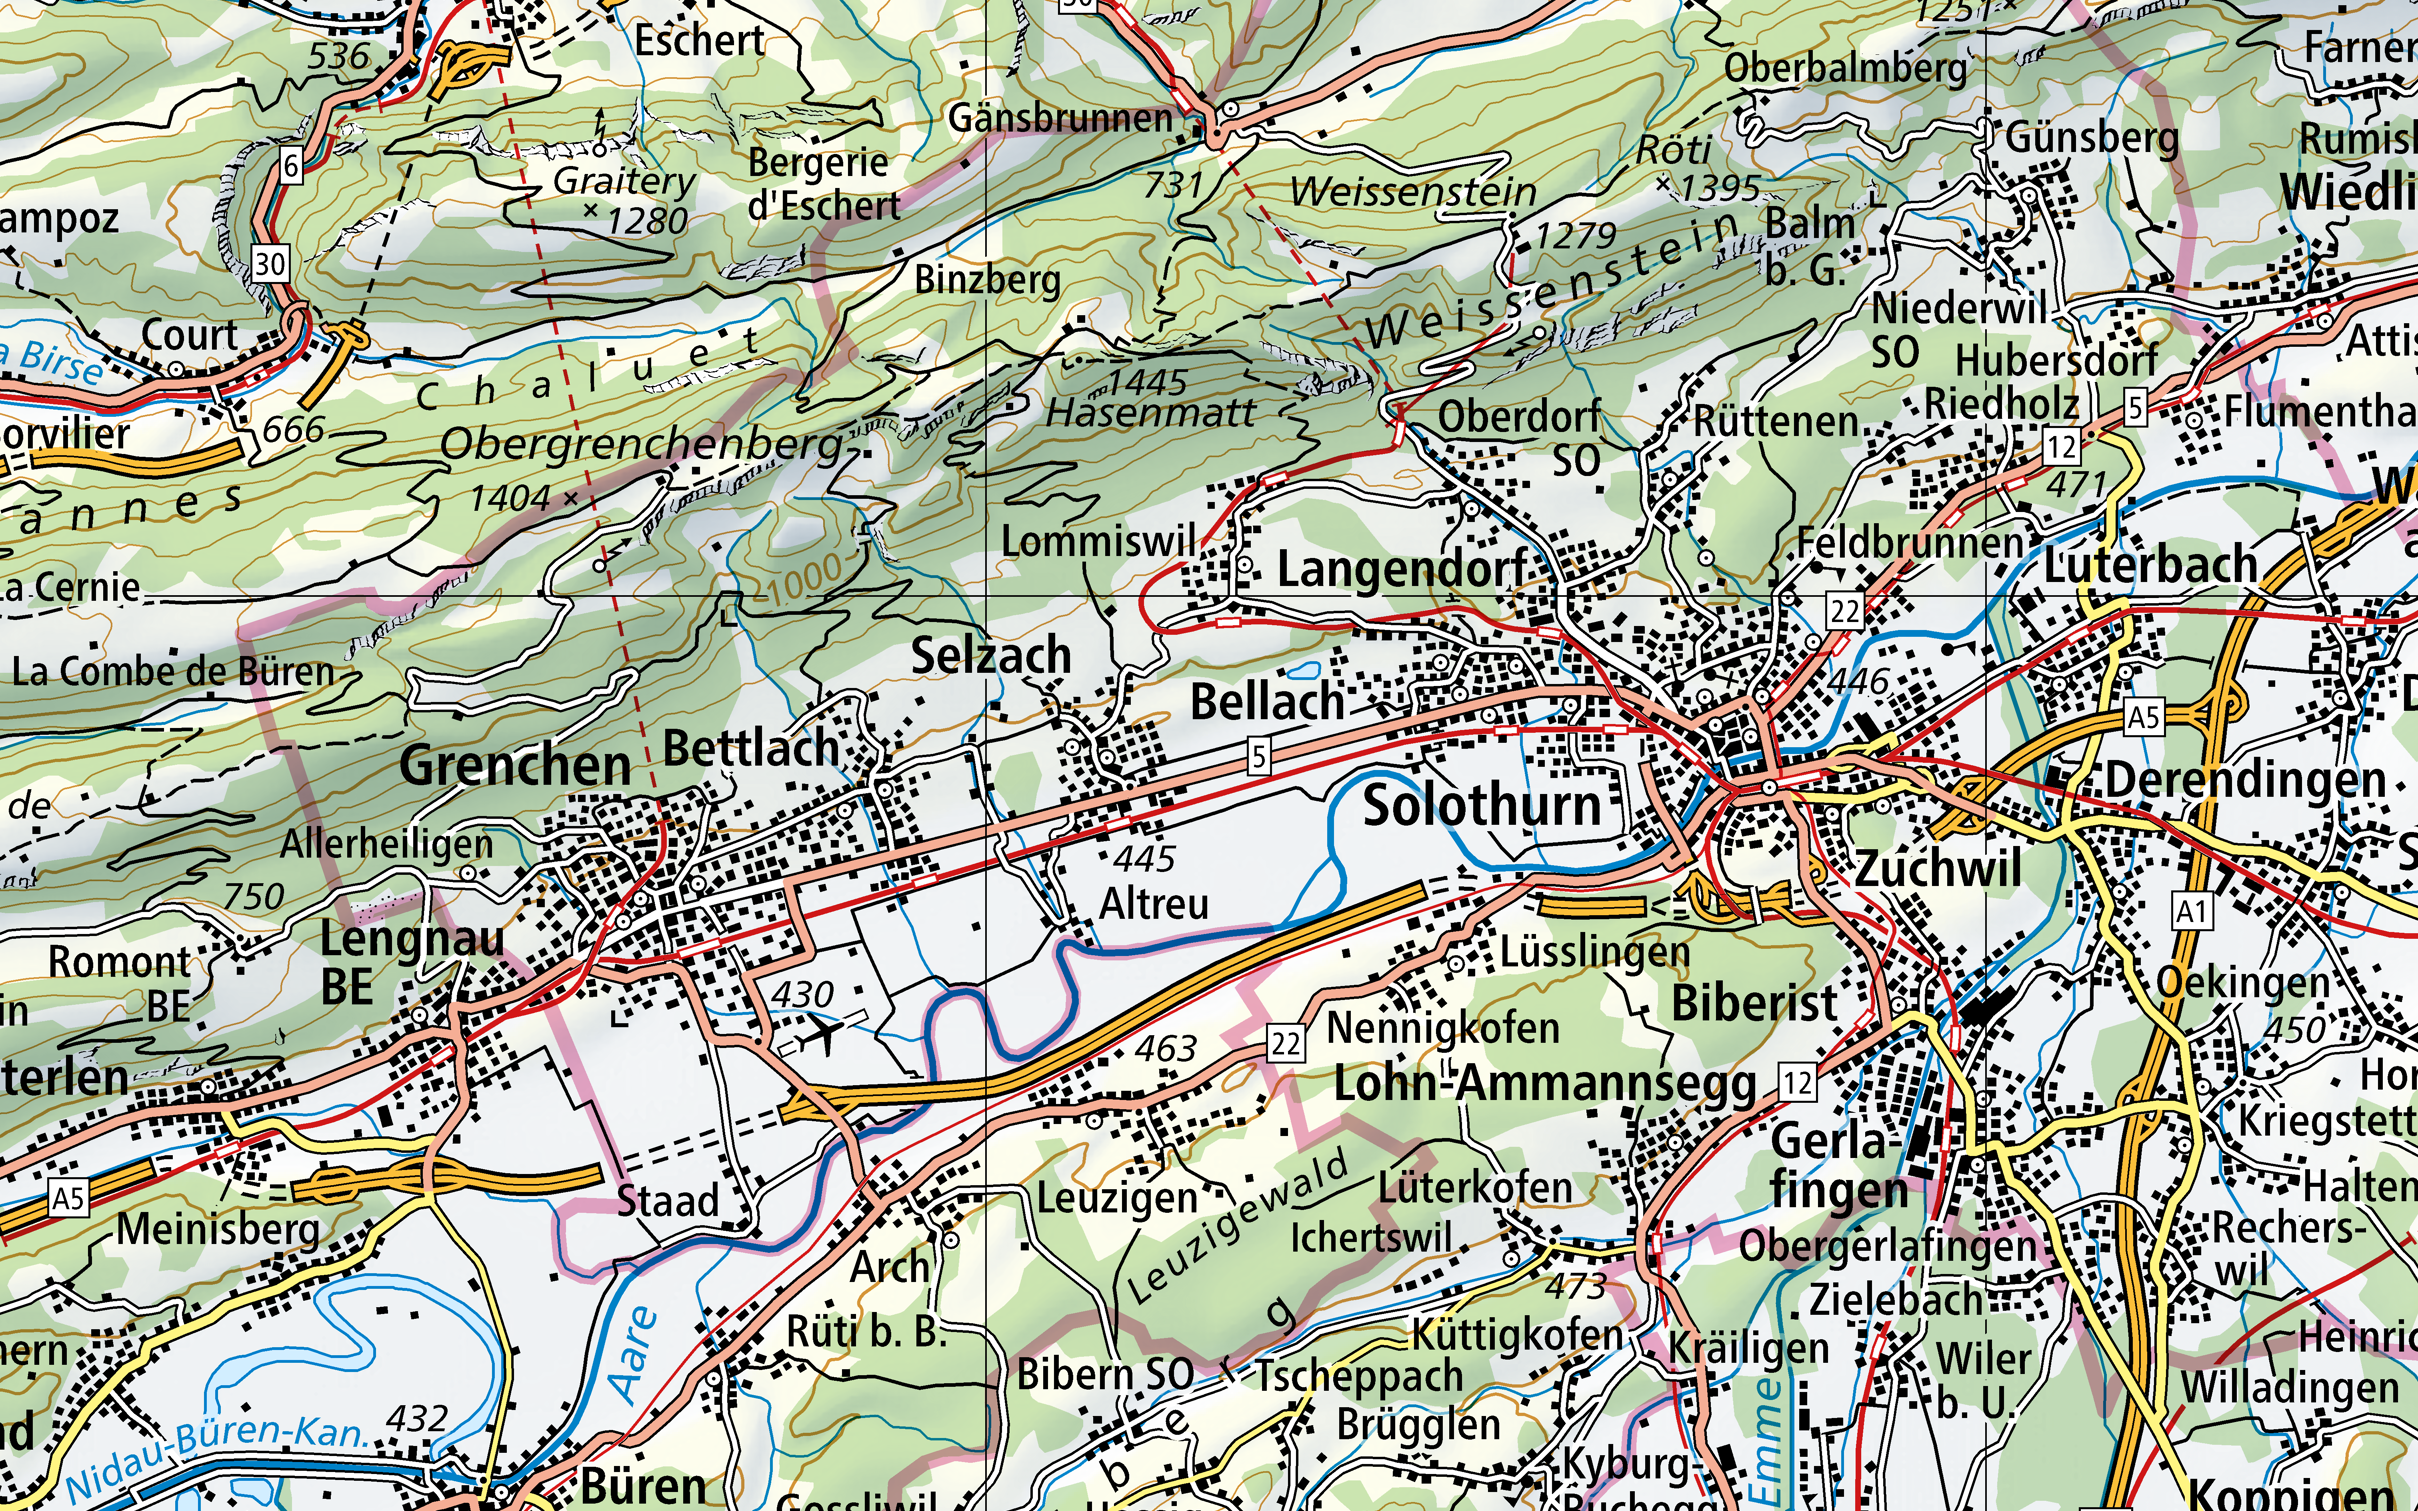 The picture shows a section of the Swiss Map Raster 200 map from the Solothurn area to Pieterlen with the Weissenstein.